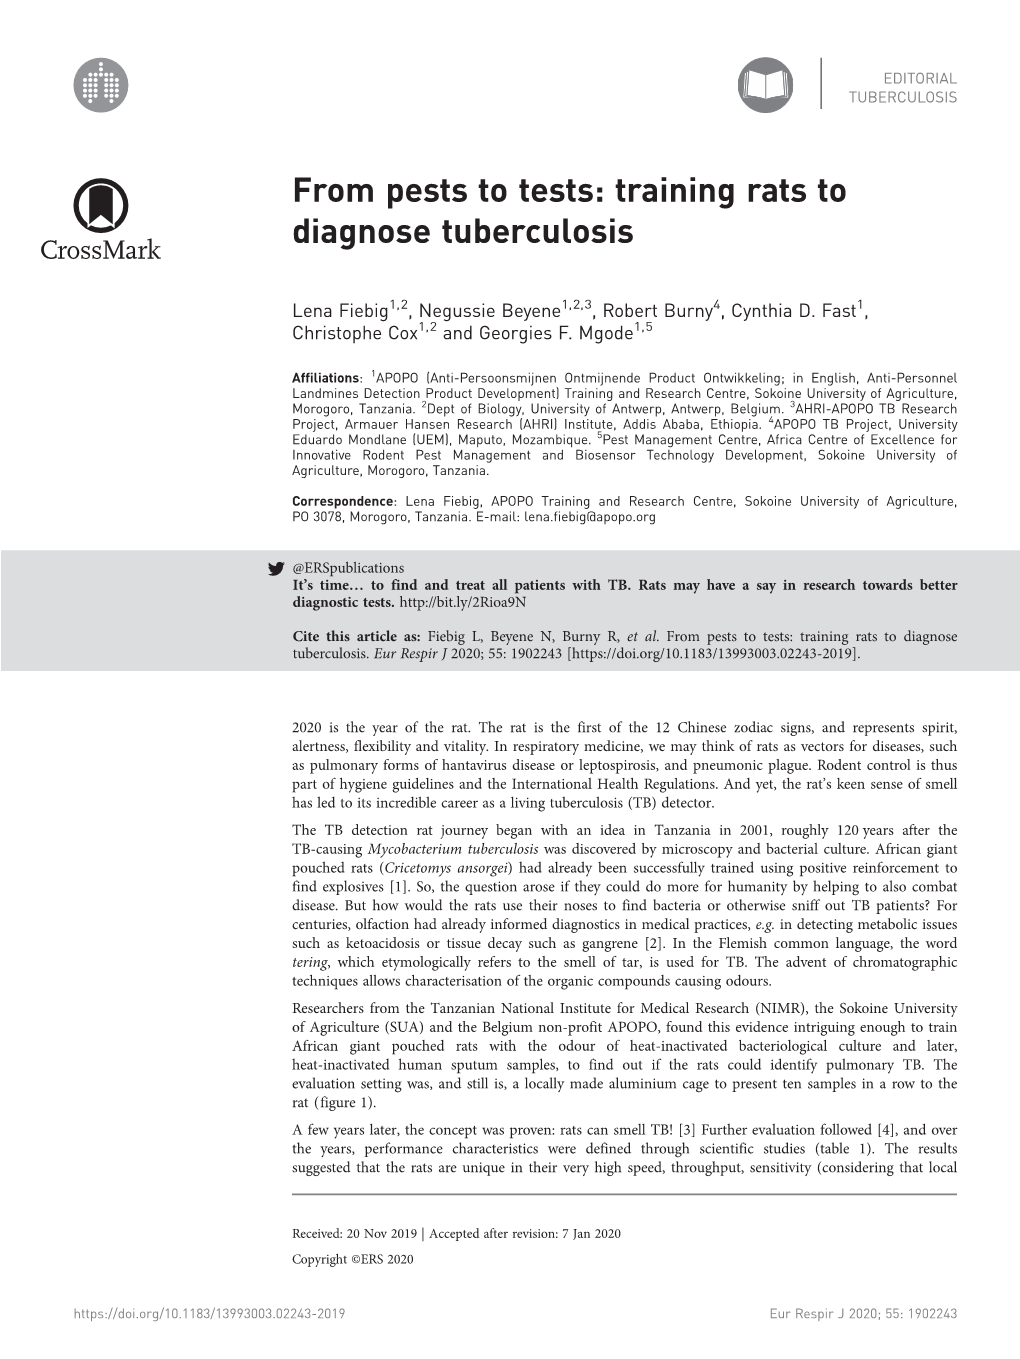 From Pests to Tests: Training Rats to Diagnose Tuberculosis